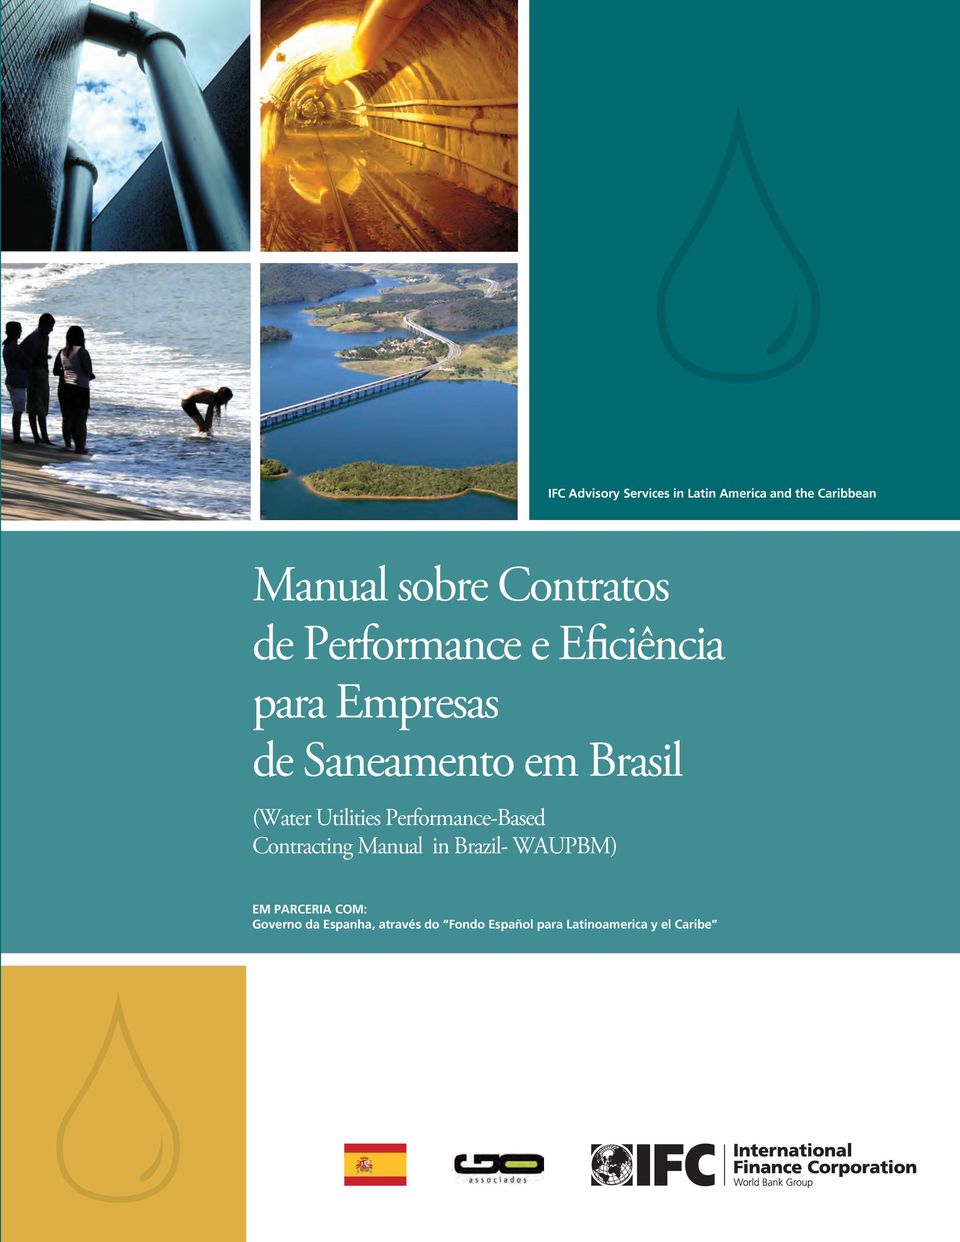 (Water Utilities Performance-Based Contracting Manual in Brazil- WAUPBM) EM